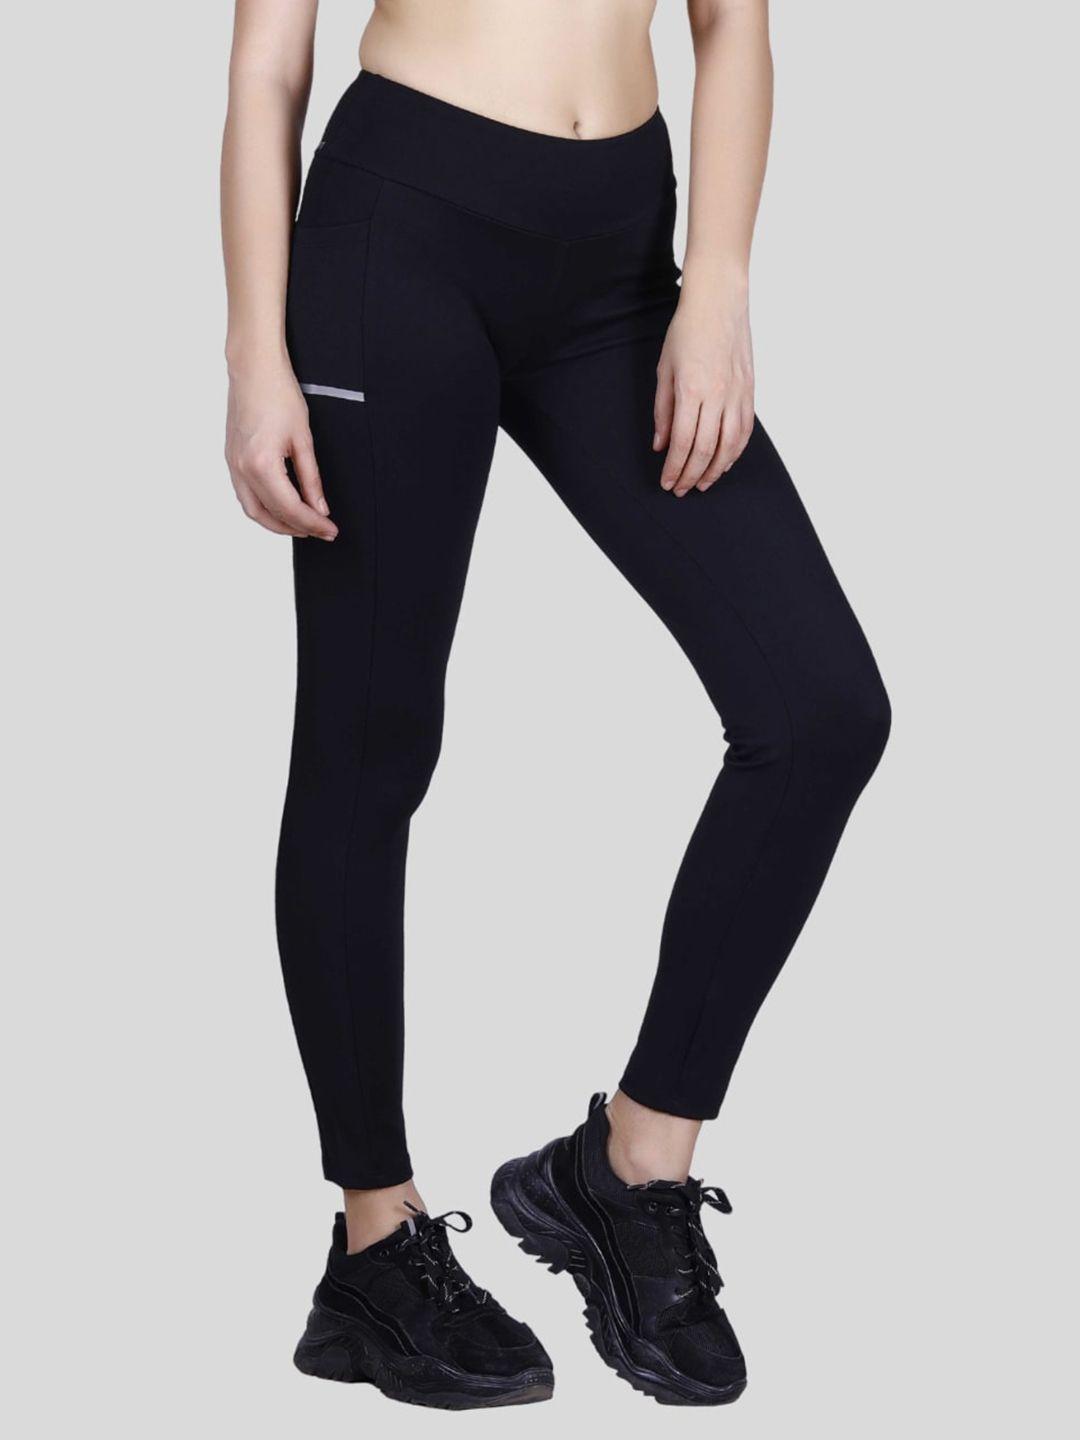 laasa  sports  women black solid just-dry ankle length workout tights